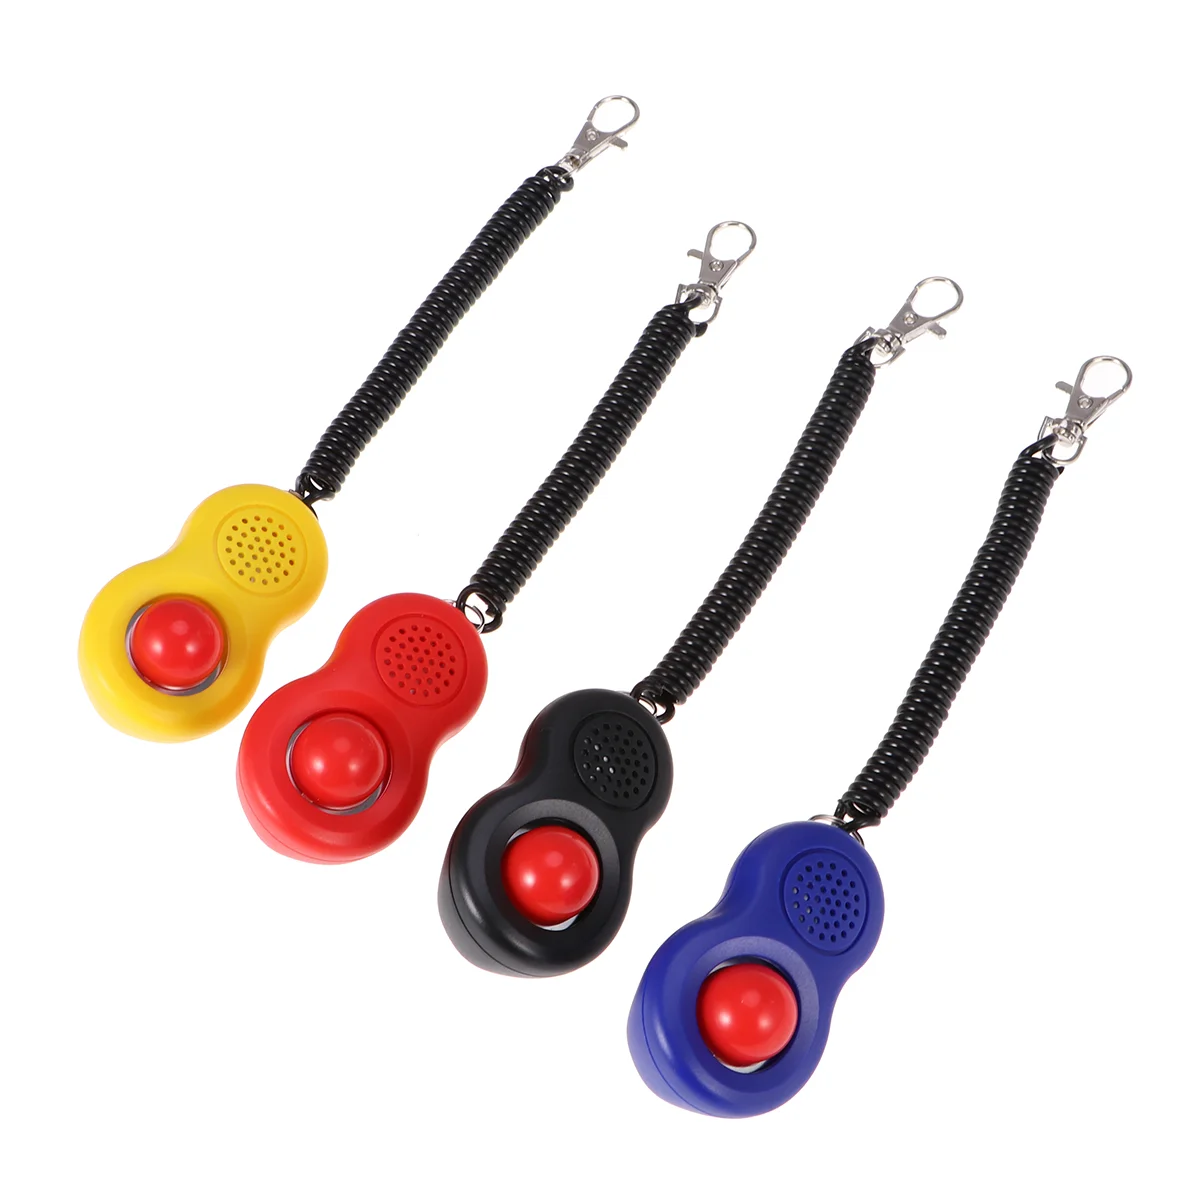 

Training Clicker Dog Petcat Clickers Withbuttons Strap Wrist Dogs Puppy Aids Big Button Behavior Tool Band Cats Set Trainer